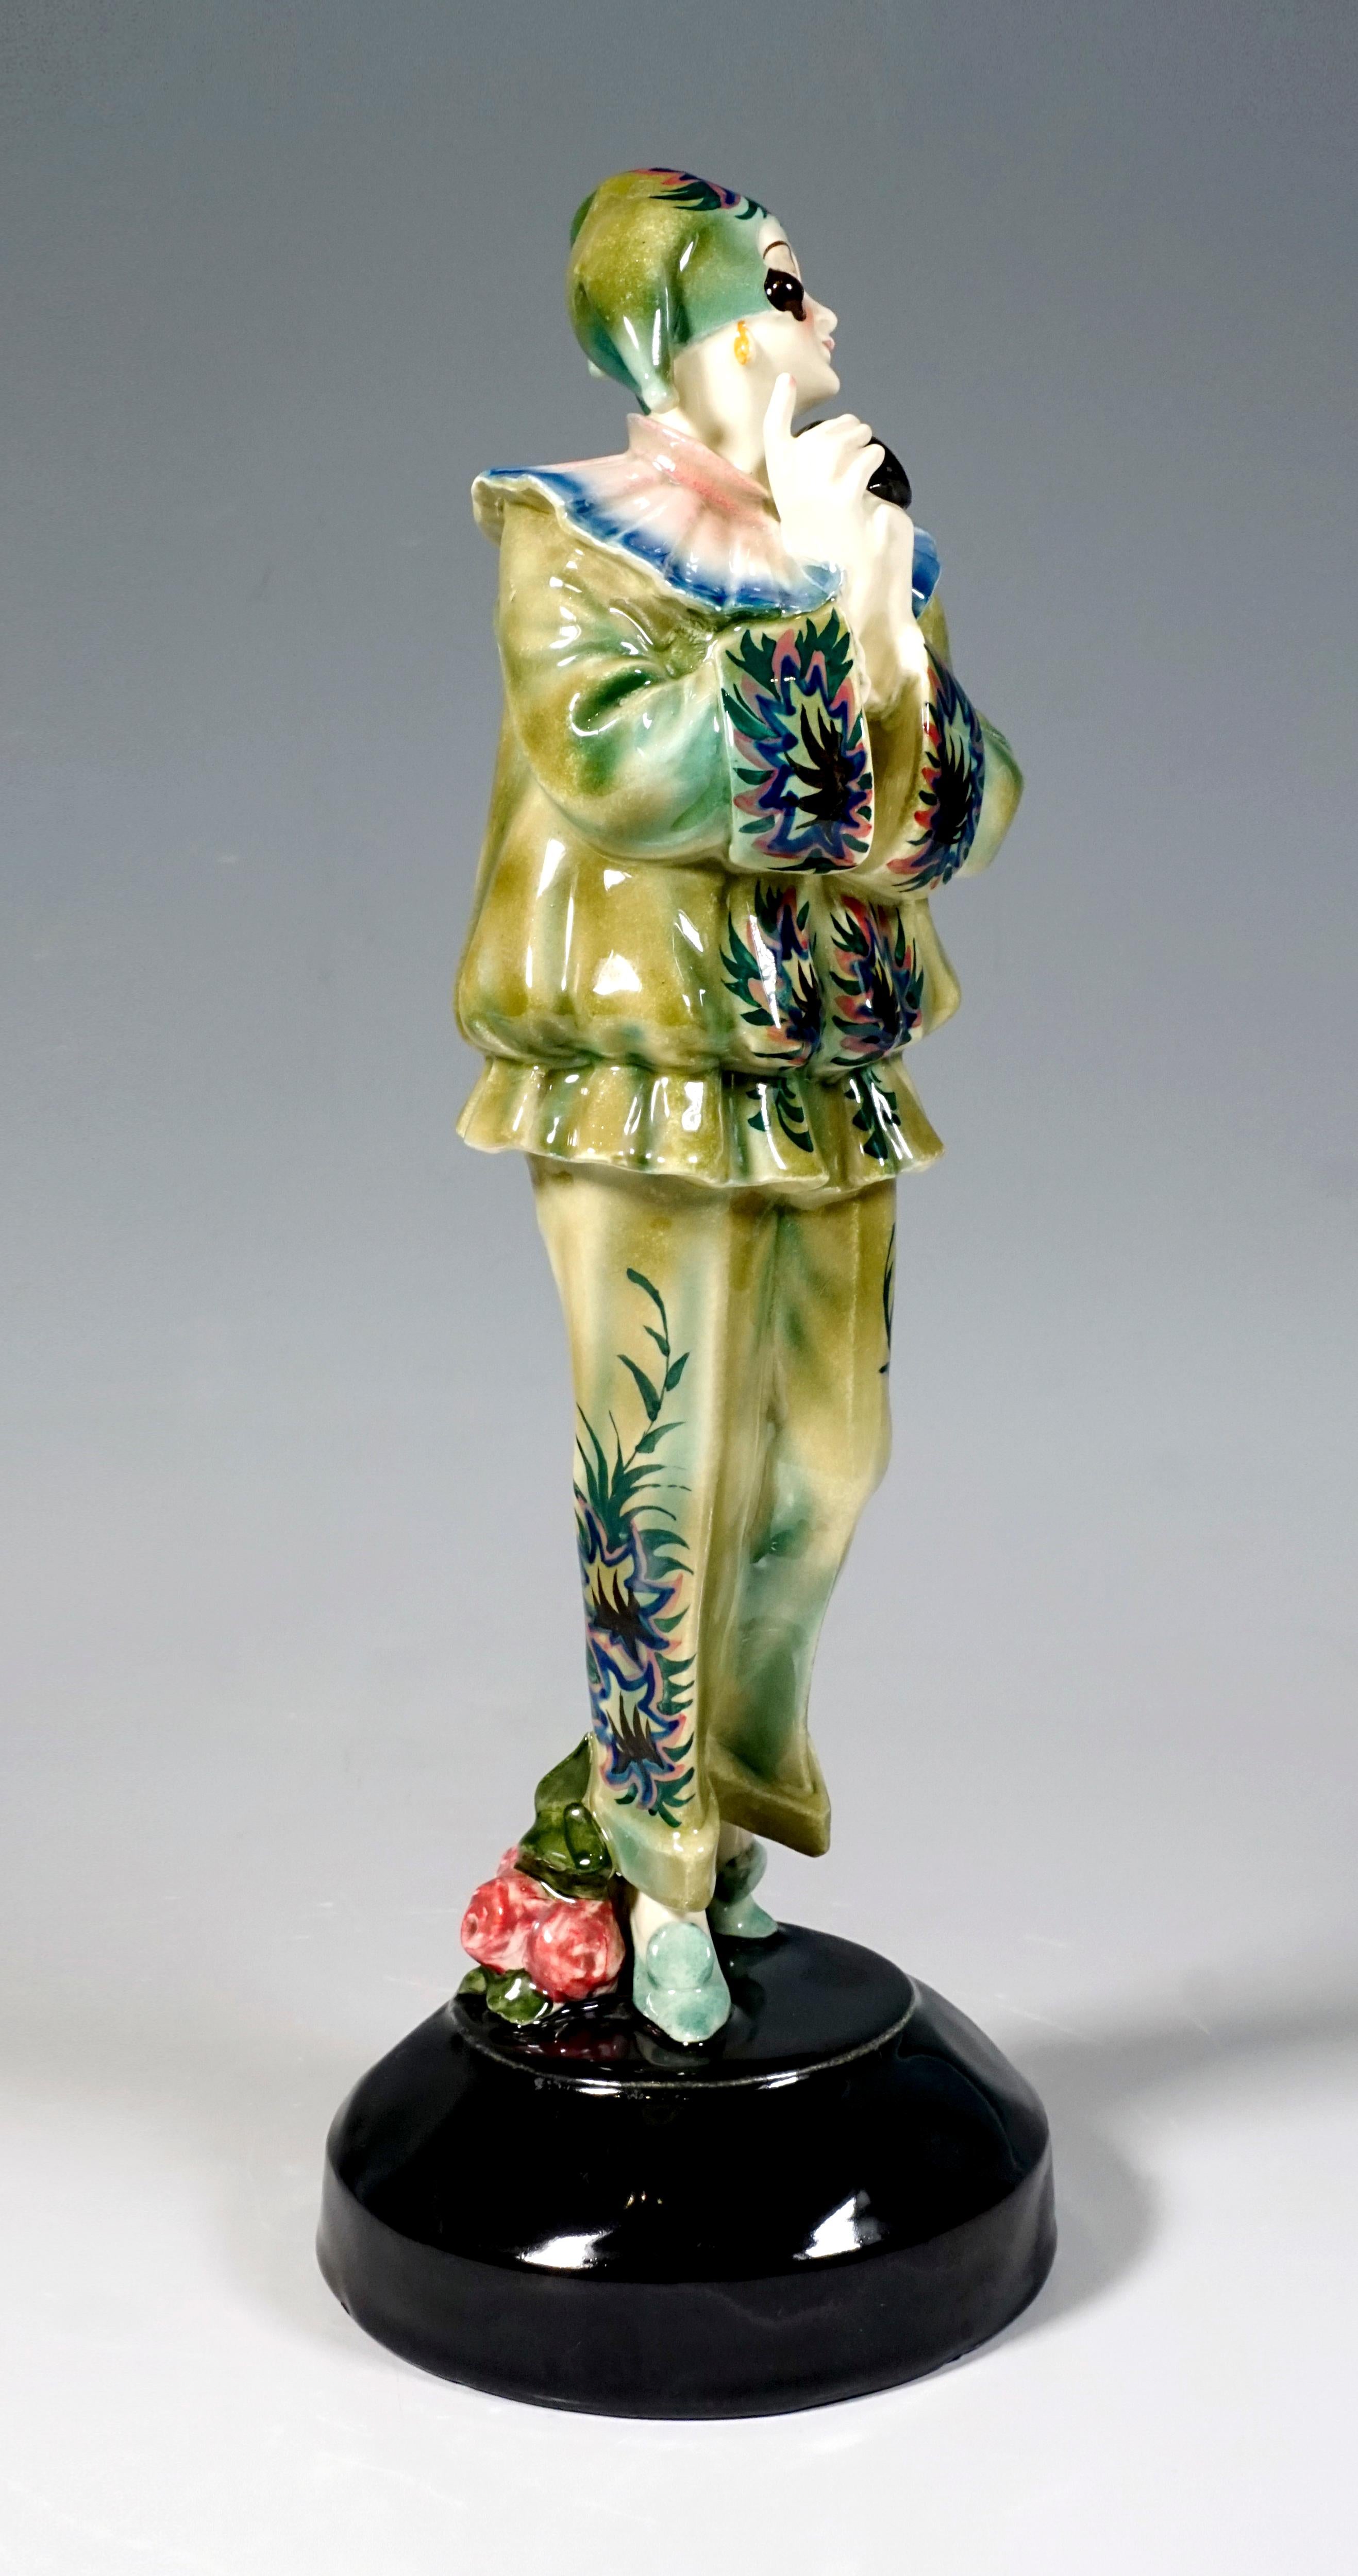 Finest Viennese ceramic art from the 1920s:
The standing young lady holds a black mask in front of her in her folded hands and looks dreamily to the side. She wears a green two-piece suit with a slouchy top and ruff and a three-pronged cap. The